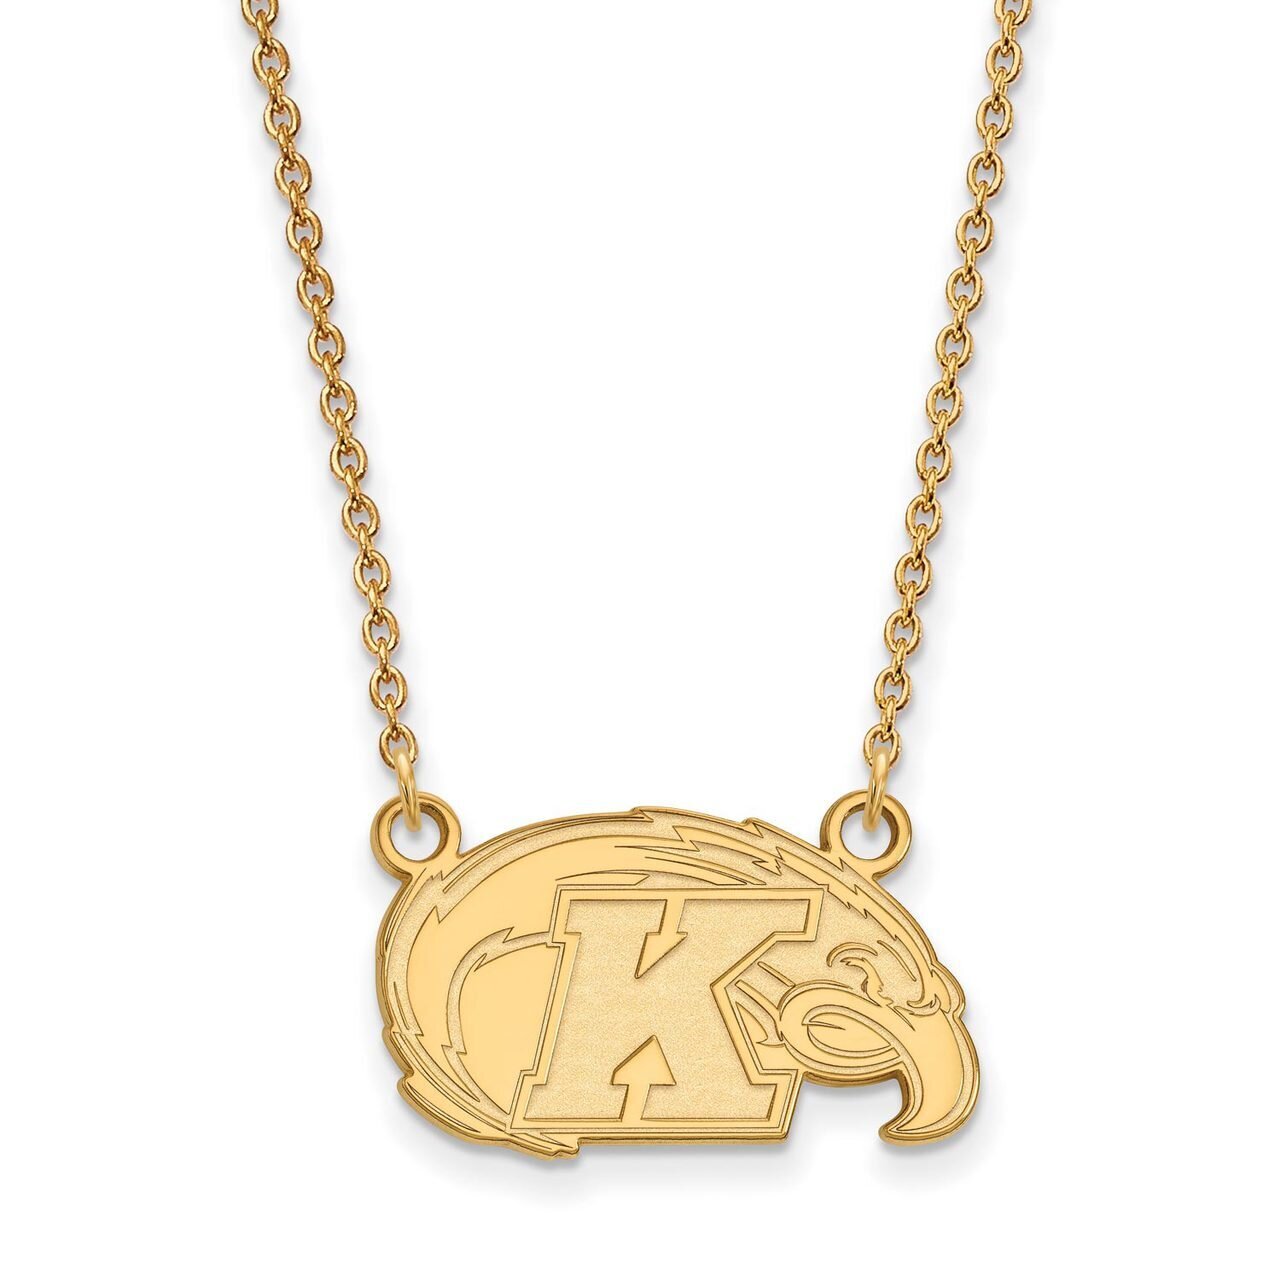 Kent State University Small Pendant with Chain Necklace 14k Yellow Gold 4Y008KEN-18